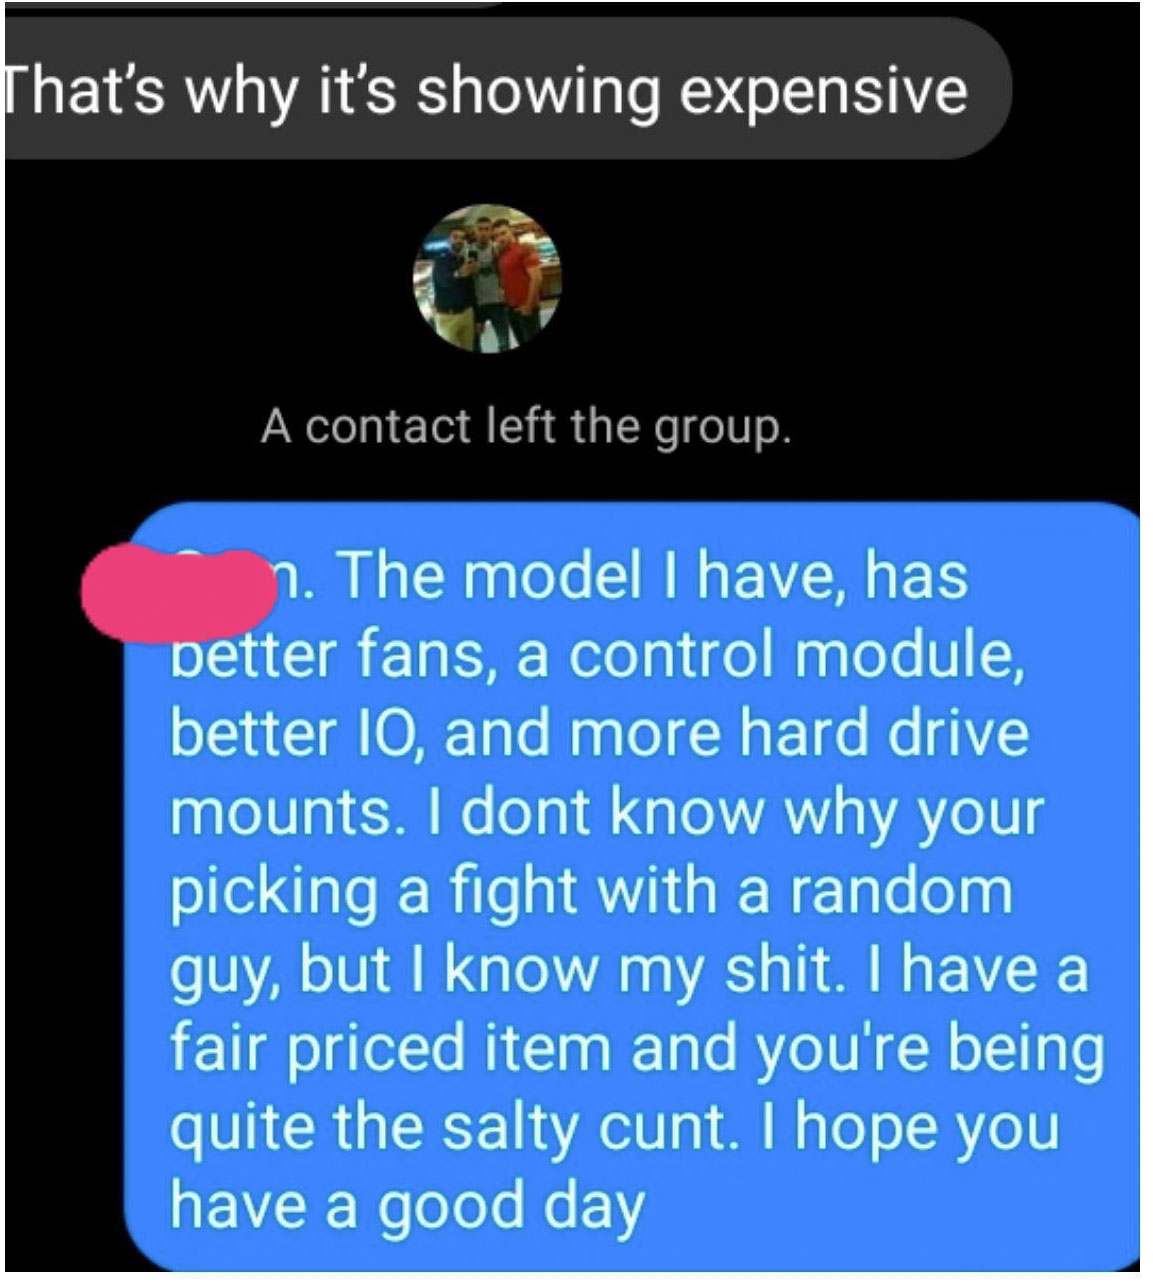 lyrics - That's why it's showing expensive A contact left the group. n. The model I have, has better fans, a control module, better 10, and more hard drive mounts. I dont know why your picking a fight with a random guy, but I know my shit. I have a fair p